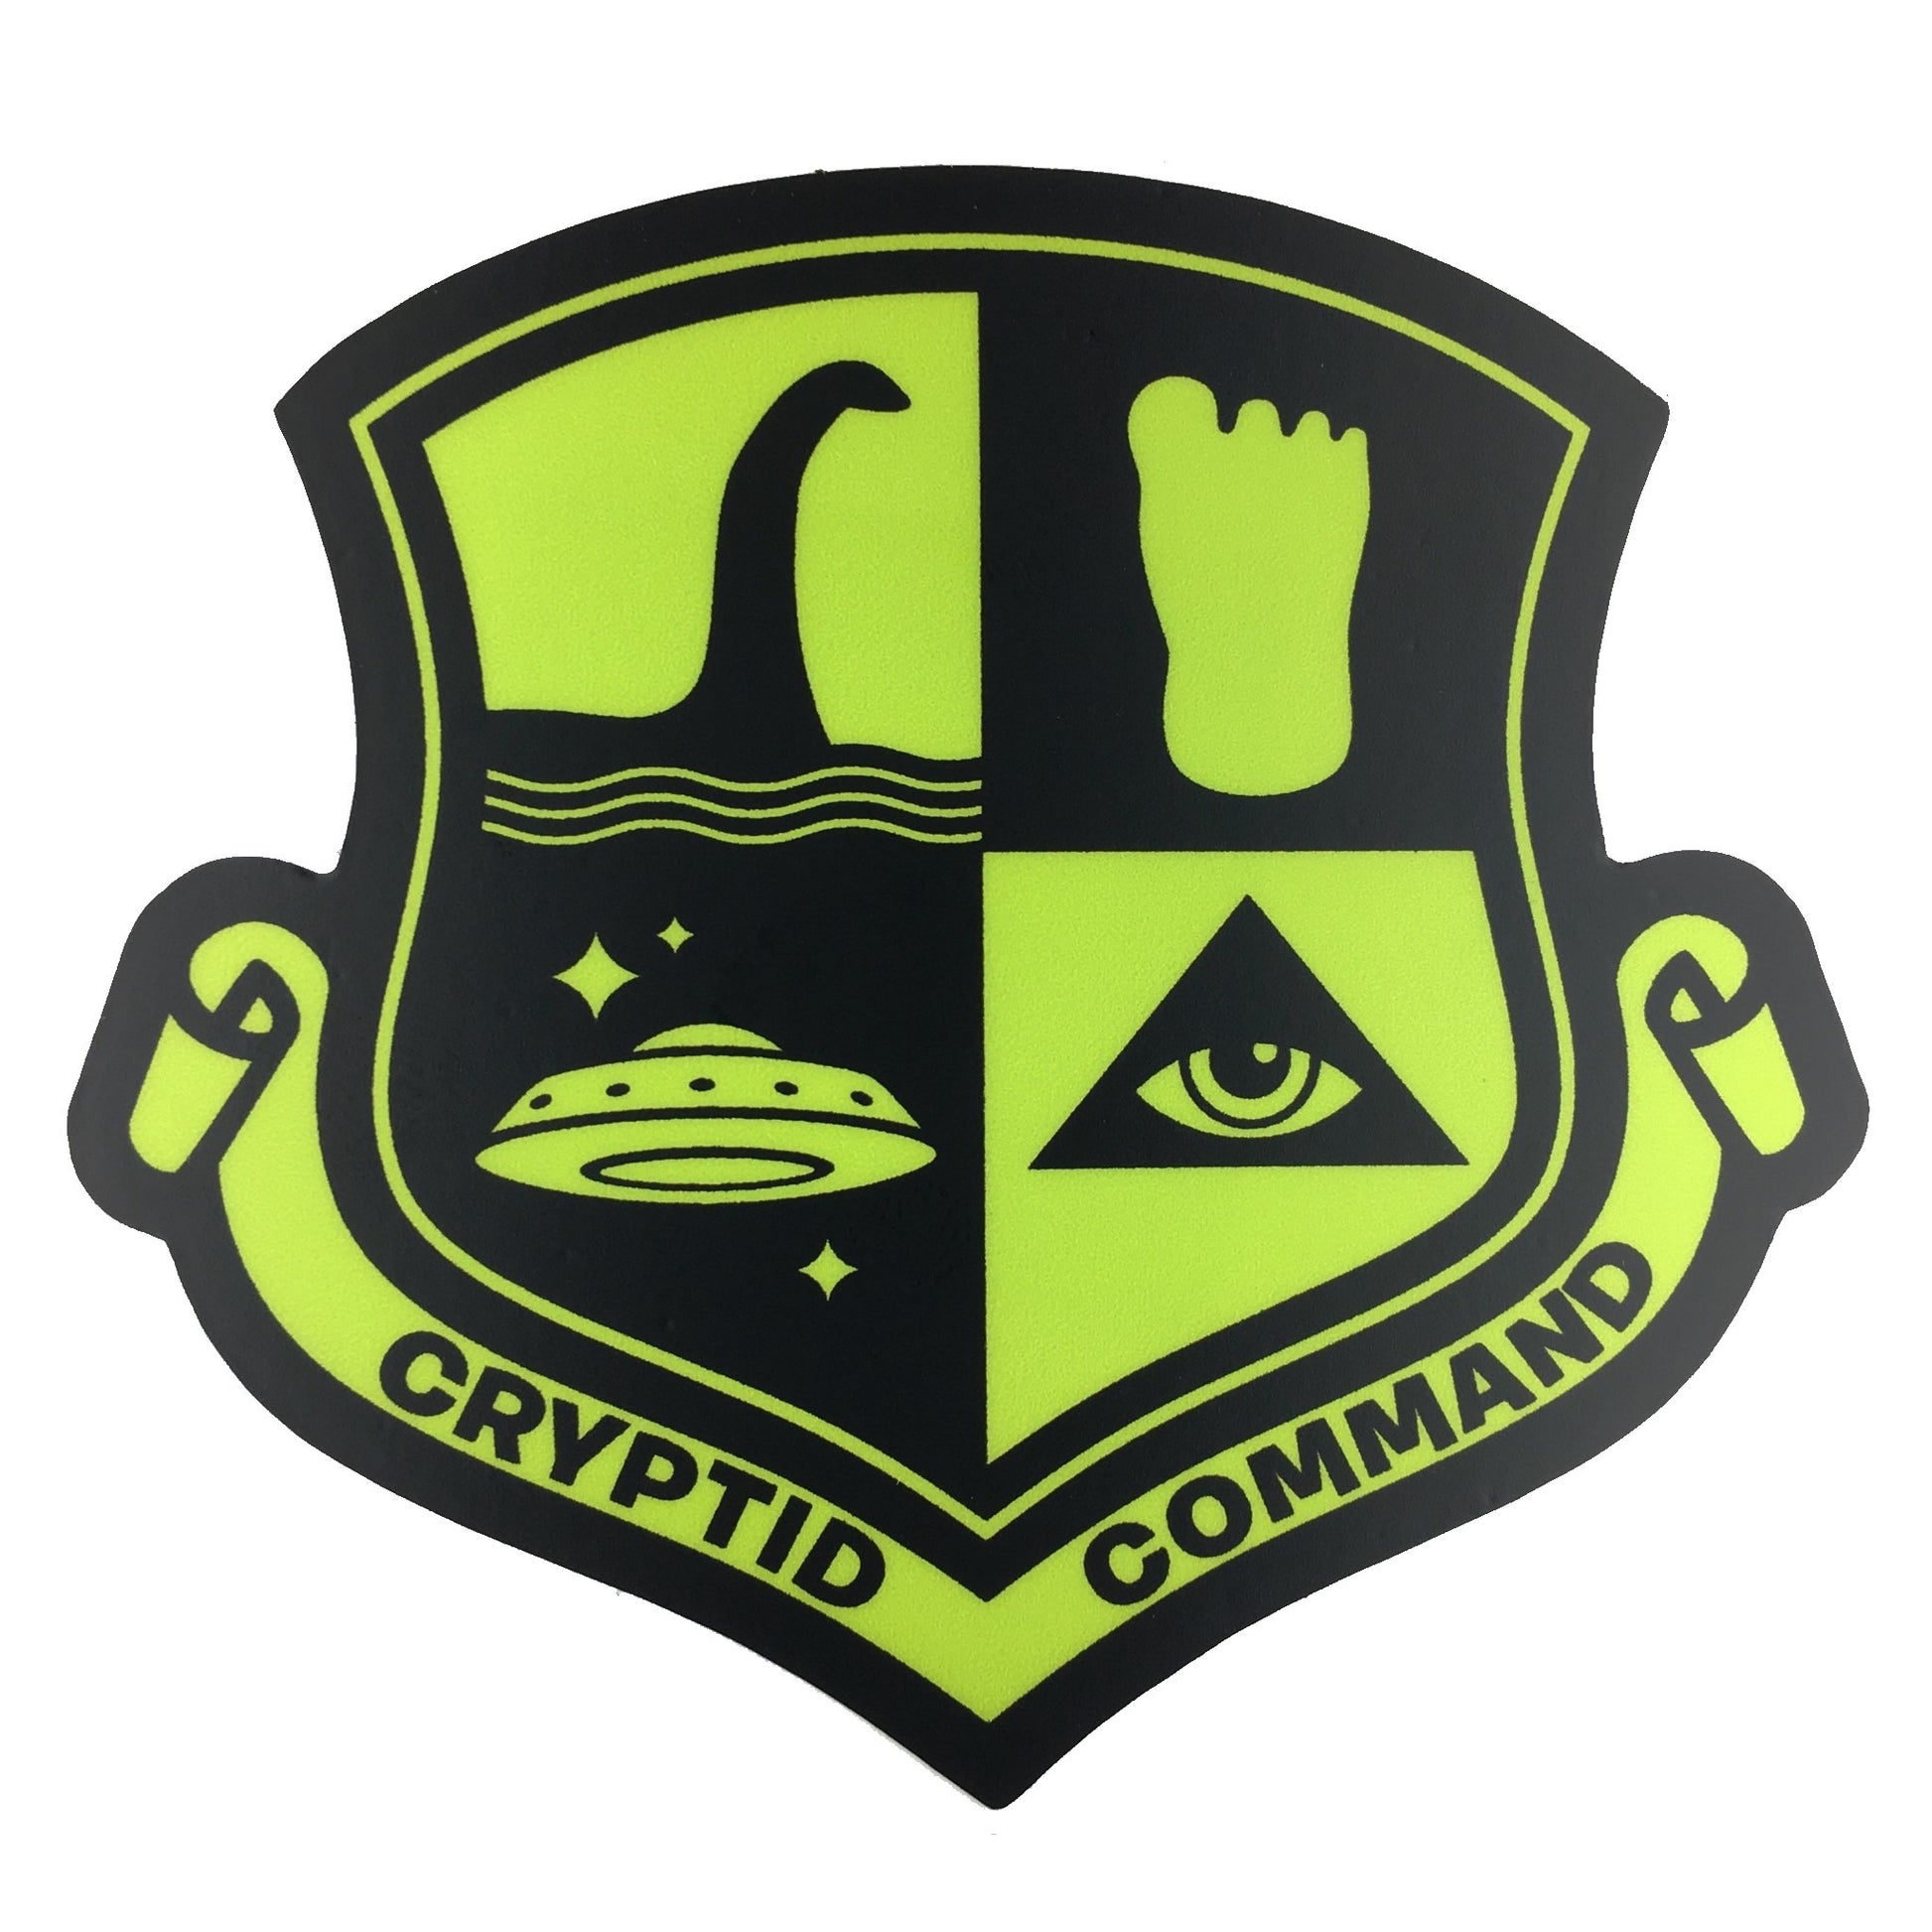 Cryptid Command military shield insignia sticker featuring Bigfoot, Nessie & UFO - by Monsterologist